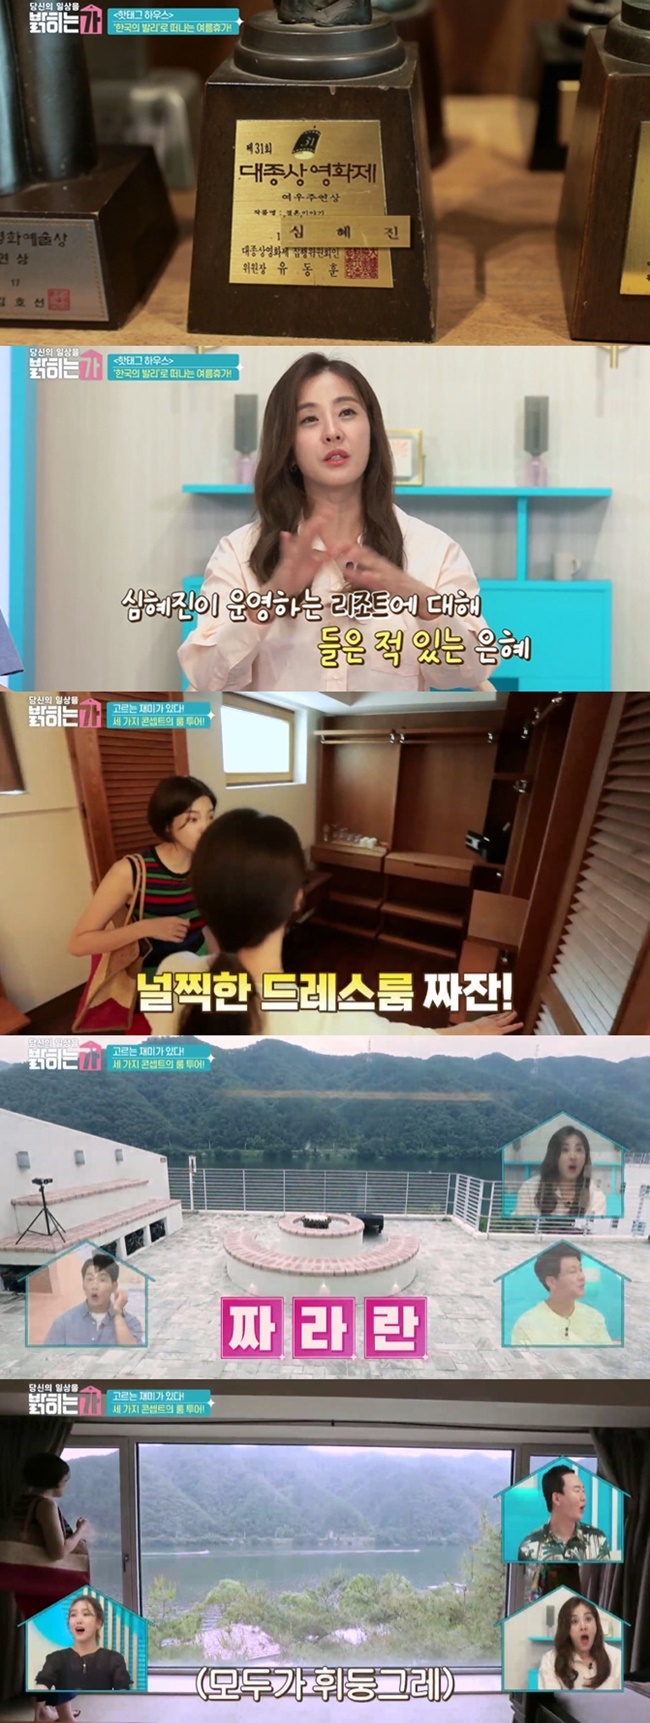 The Southeast Asian atmosphere Cheongshim International Academy Resort, run by Actor Shim Hye-jin, was unveiled in Do you reveal your daily life?On July 6, SBS FiL Do you reveal your daily life, Jeong Ga-eun visited the Cheongshim International Academy Hotel operated by Hot Tag House mate Kim Hyun-young and Actor Shim Hye-jin.The list price found numerous trophies in the lobby, and the trophy of the Best Actress Award at the Daejong Film Festival caught the eye.As it turns out, the person who runs the resort was Actor Shim Hye-jin. Park Eun-hye said, I heard that Shim Hye-jin runs the resort.The price tag, Kim Hyun-young, found the first room, and the homely Feelings was created by the optimized room structure and the wood and white match for family guests.The list price is safe from the mothers position with the child because it is a room closed with the floor.The wide list price opened a spacious dress room with a room and admired it as a dress room in a 5 or 60-pyeong apartment.The highlight of the room was the terrace, which had an open luxury terrace as the room was named a terrace suite.Park, who watched this, was surprised that I do not believe that it is this much, but it is not a special room. Jeong Ga-eun explained, All rooms are called this view.There was also a sunbed to appreciate Mountain View, which completely took the heart of the price. The price was just as I felt in Bali.The other room had a tatami bed and felt like a Japanese Hotel. Park expressed satisfaction that those who can not sleep in a fluffy place will use it well.Kim Hyun-young said, It would be nice to sit on a bamboo bed and talk rather than just hug it on the floor in summer.This room also attracted attention with its beautiful view: lying on a tatami bed, offering a water bruising that would make you feel like you were floating on the water when you looked out the window.After the tour, Kim Hyun-young found the underground rock pool, and they played with each other by splashing water, and spent a leisurely time lying on the tube.MCs said, I think those who have turned the channel now are Bali.